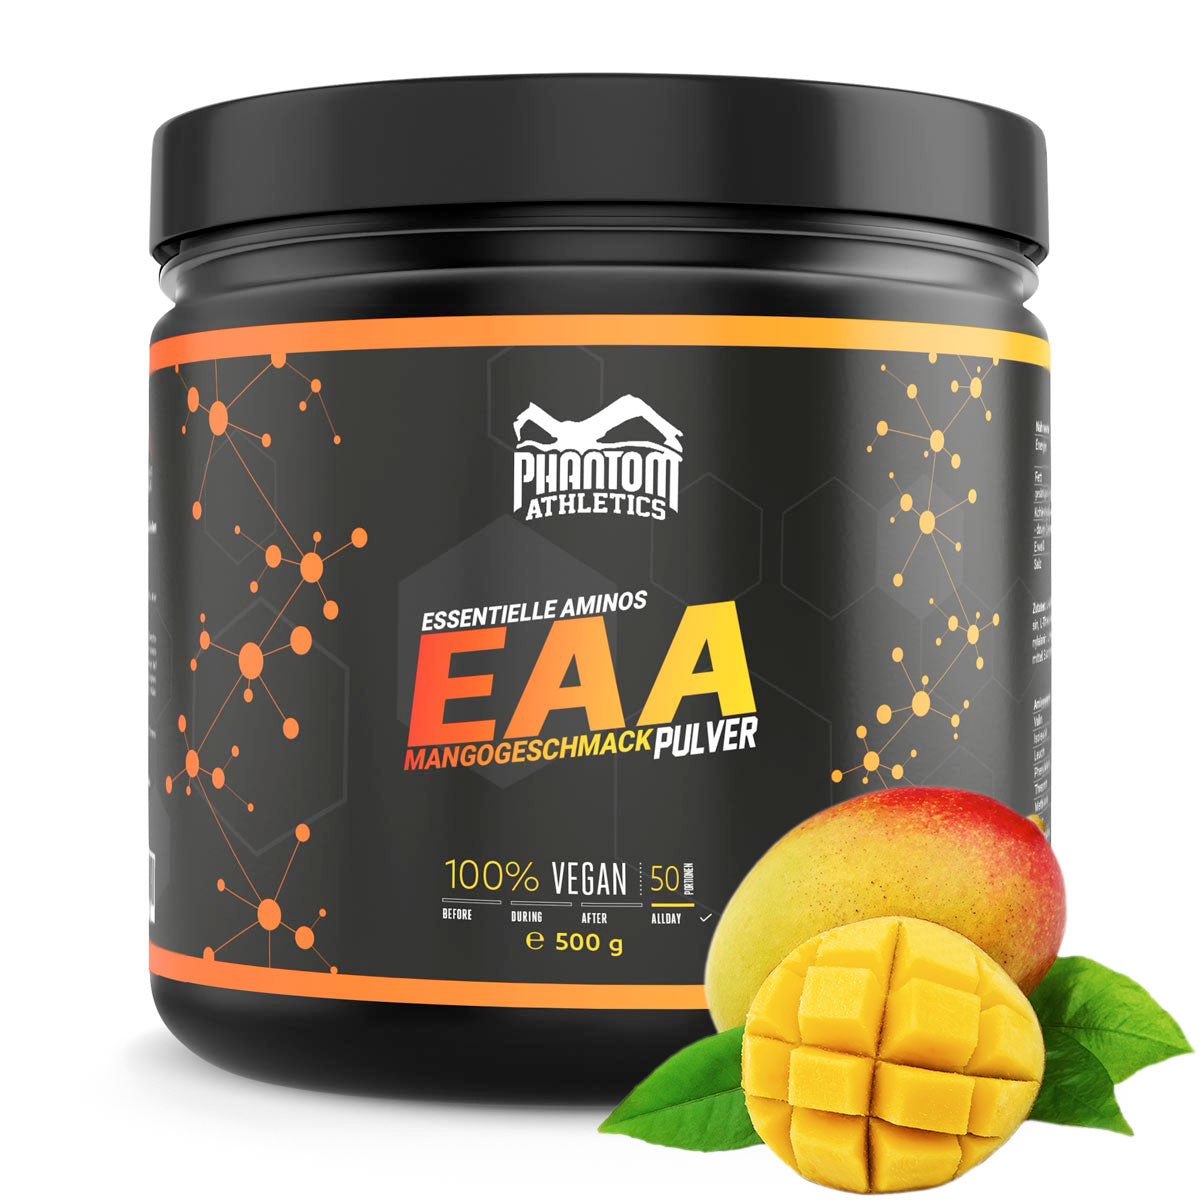 Phantom EAA - Essential Amino Acids with Mango Flavor. For optimal care in martial arts.